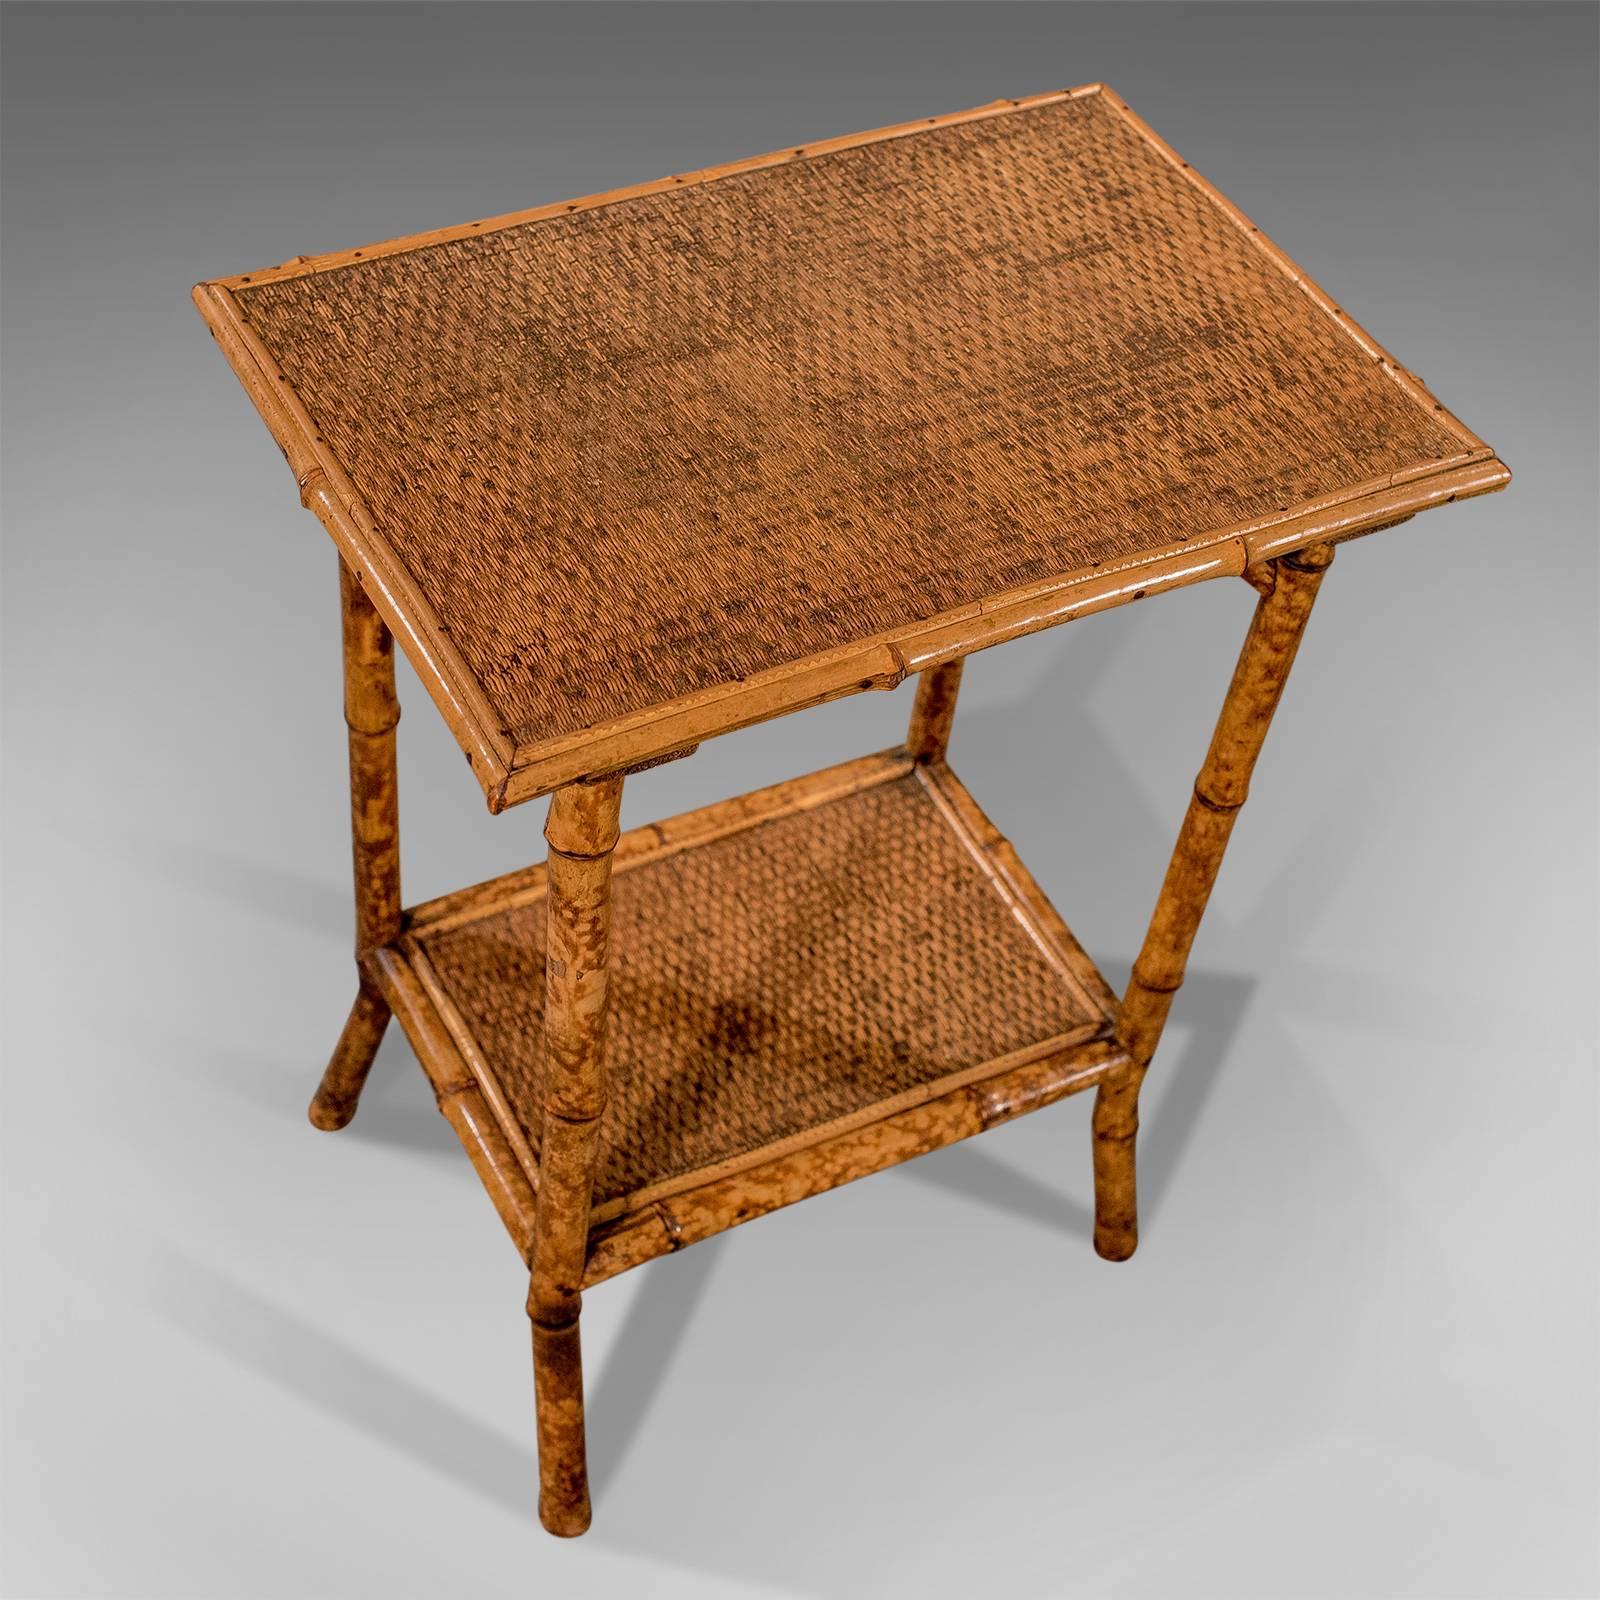 British Colonial Antique Bamboo Lamp Side Table Oriental Victorian Quality Two-Tier, circa 1900